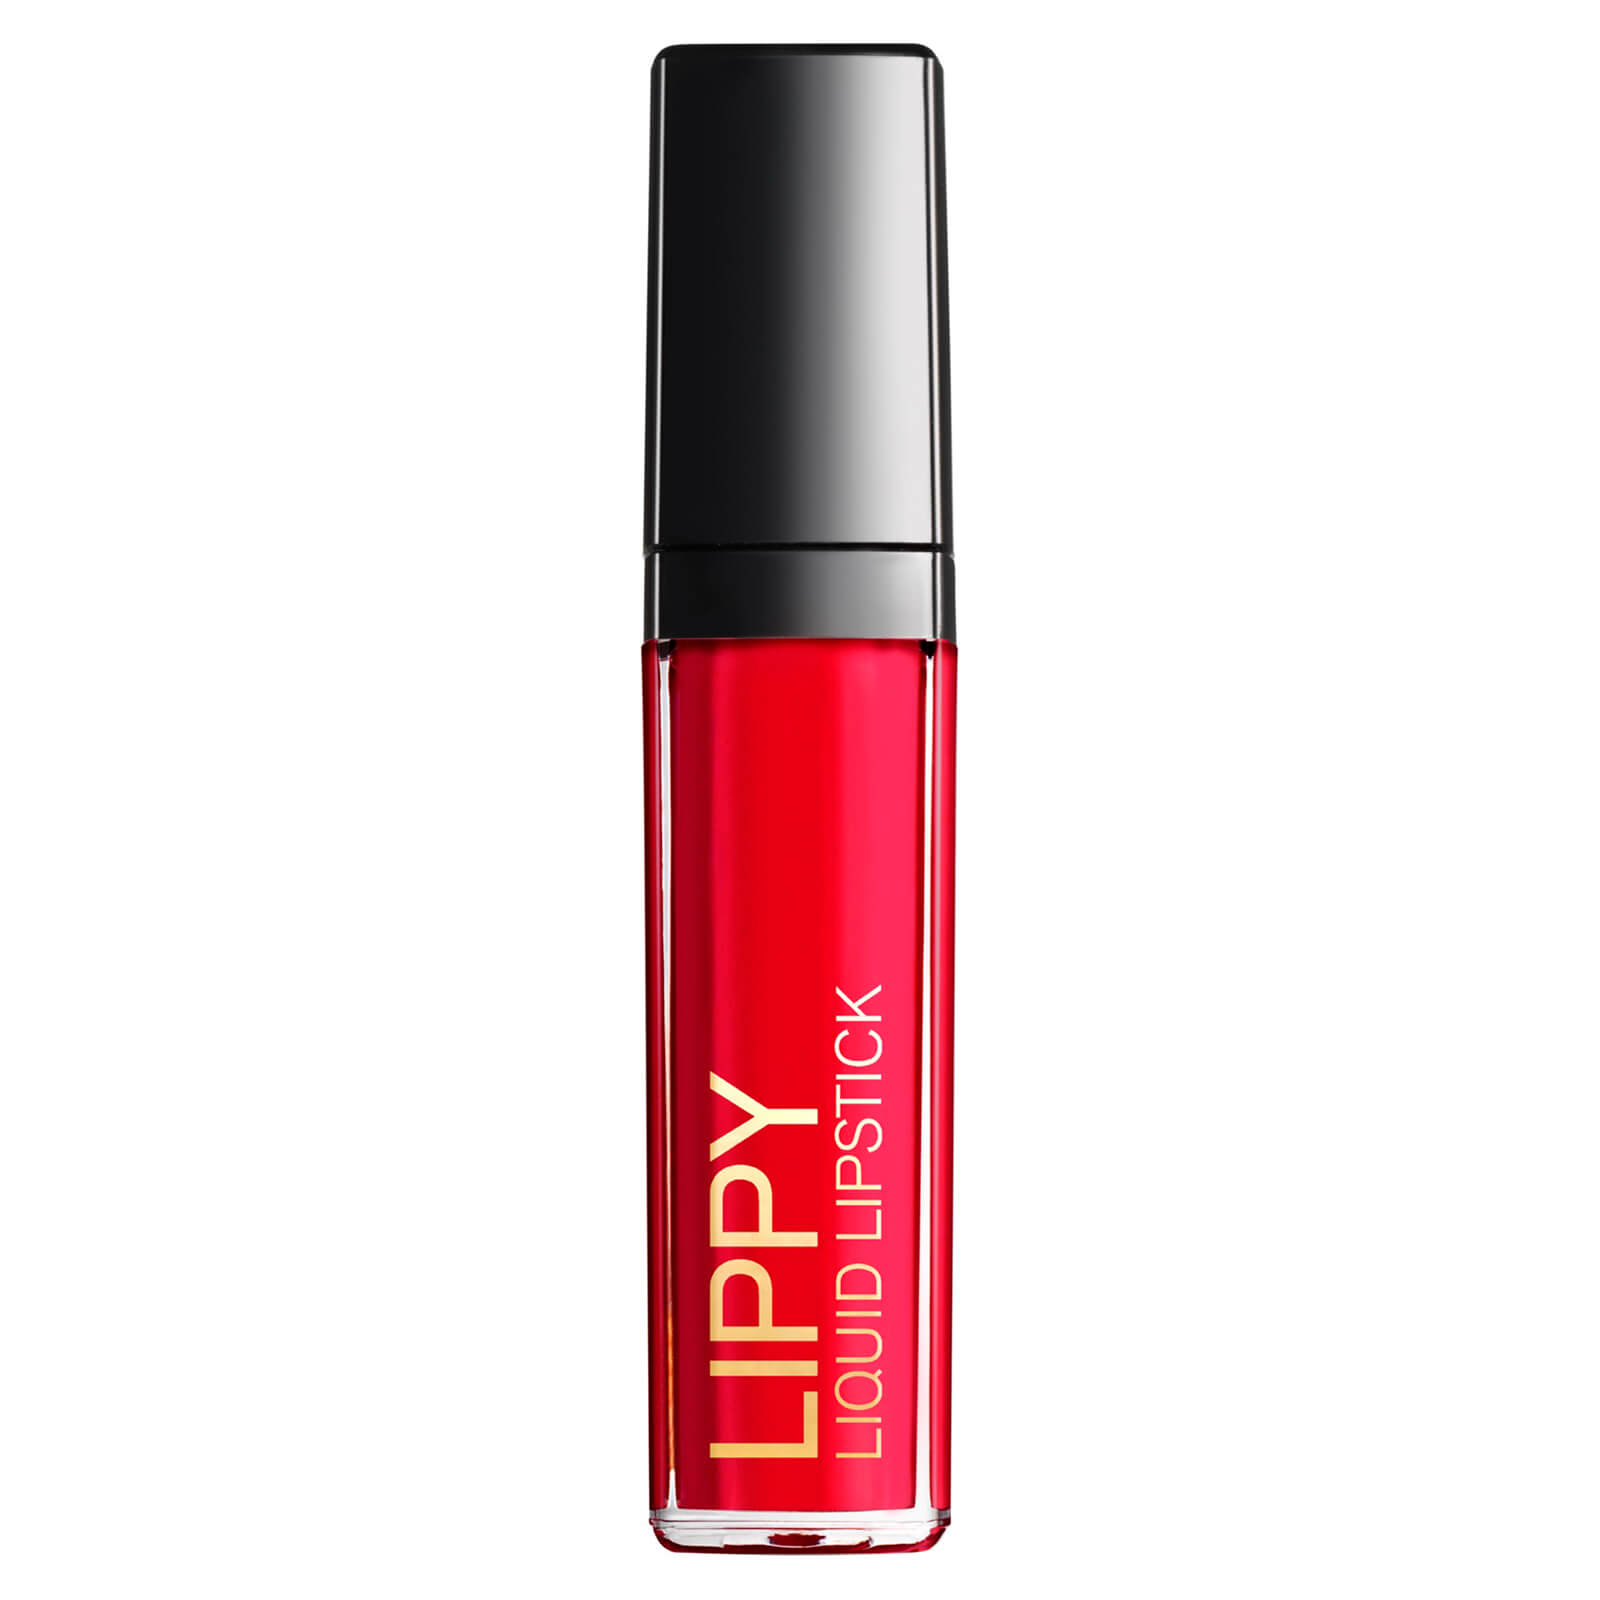 Pintalabios mate LIPPY Come To Bed Red de butter LONDON